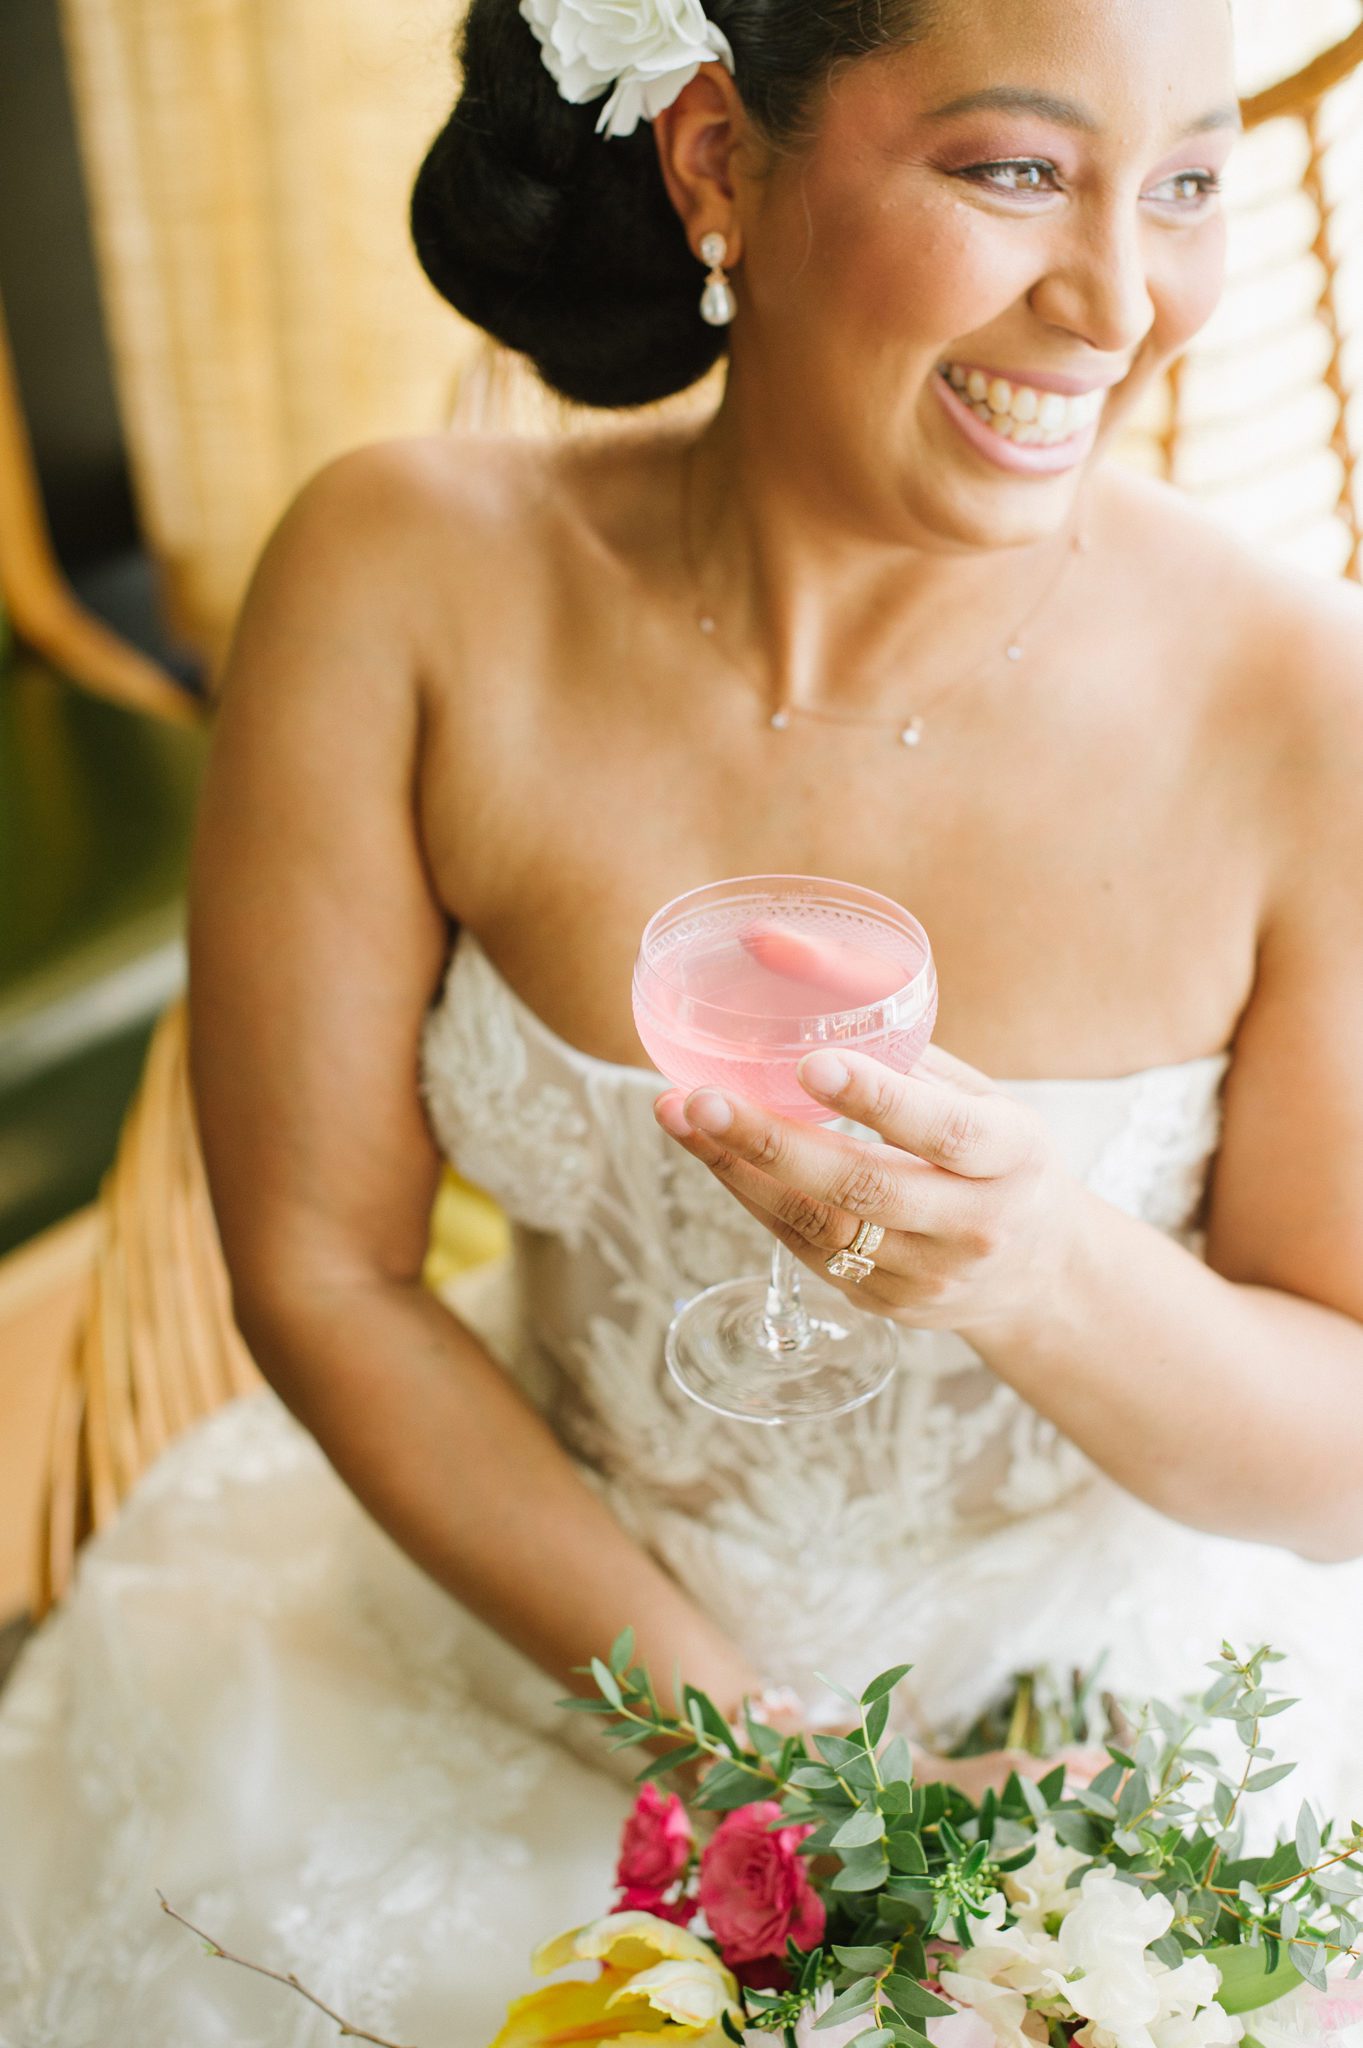 Bridal style inspiration for a spring wedding